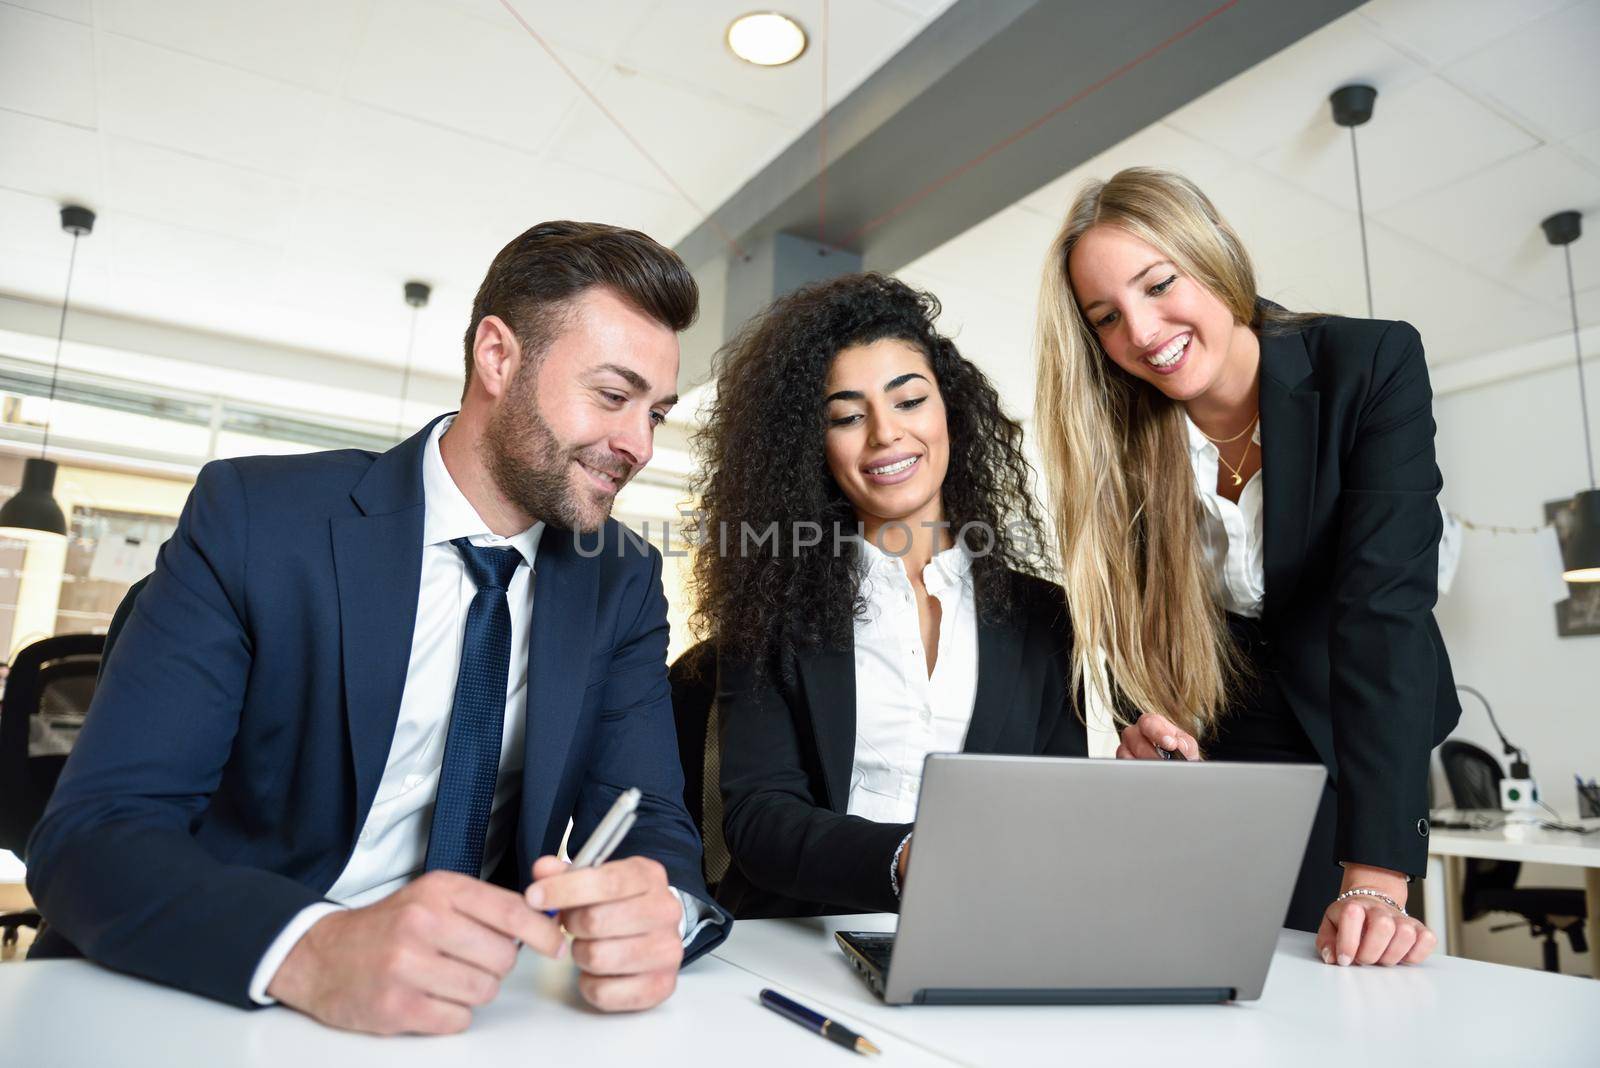 Multi-ethnic group of three businesspeople meeting in a modern office. Two women and a man wearing suit looking at a laptop computer.